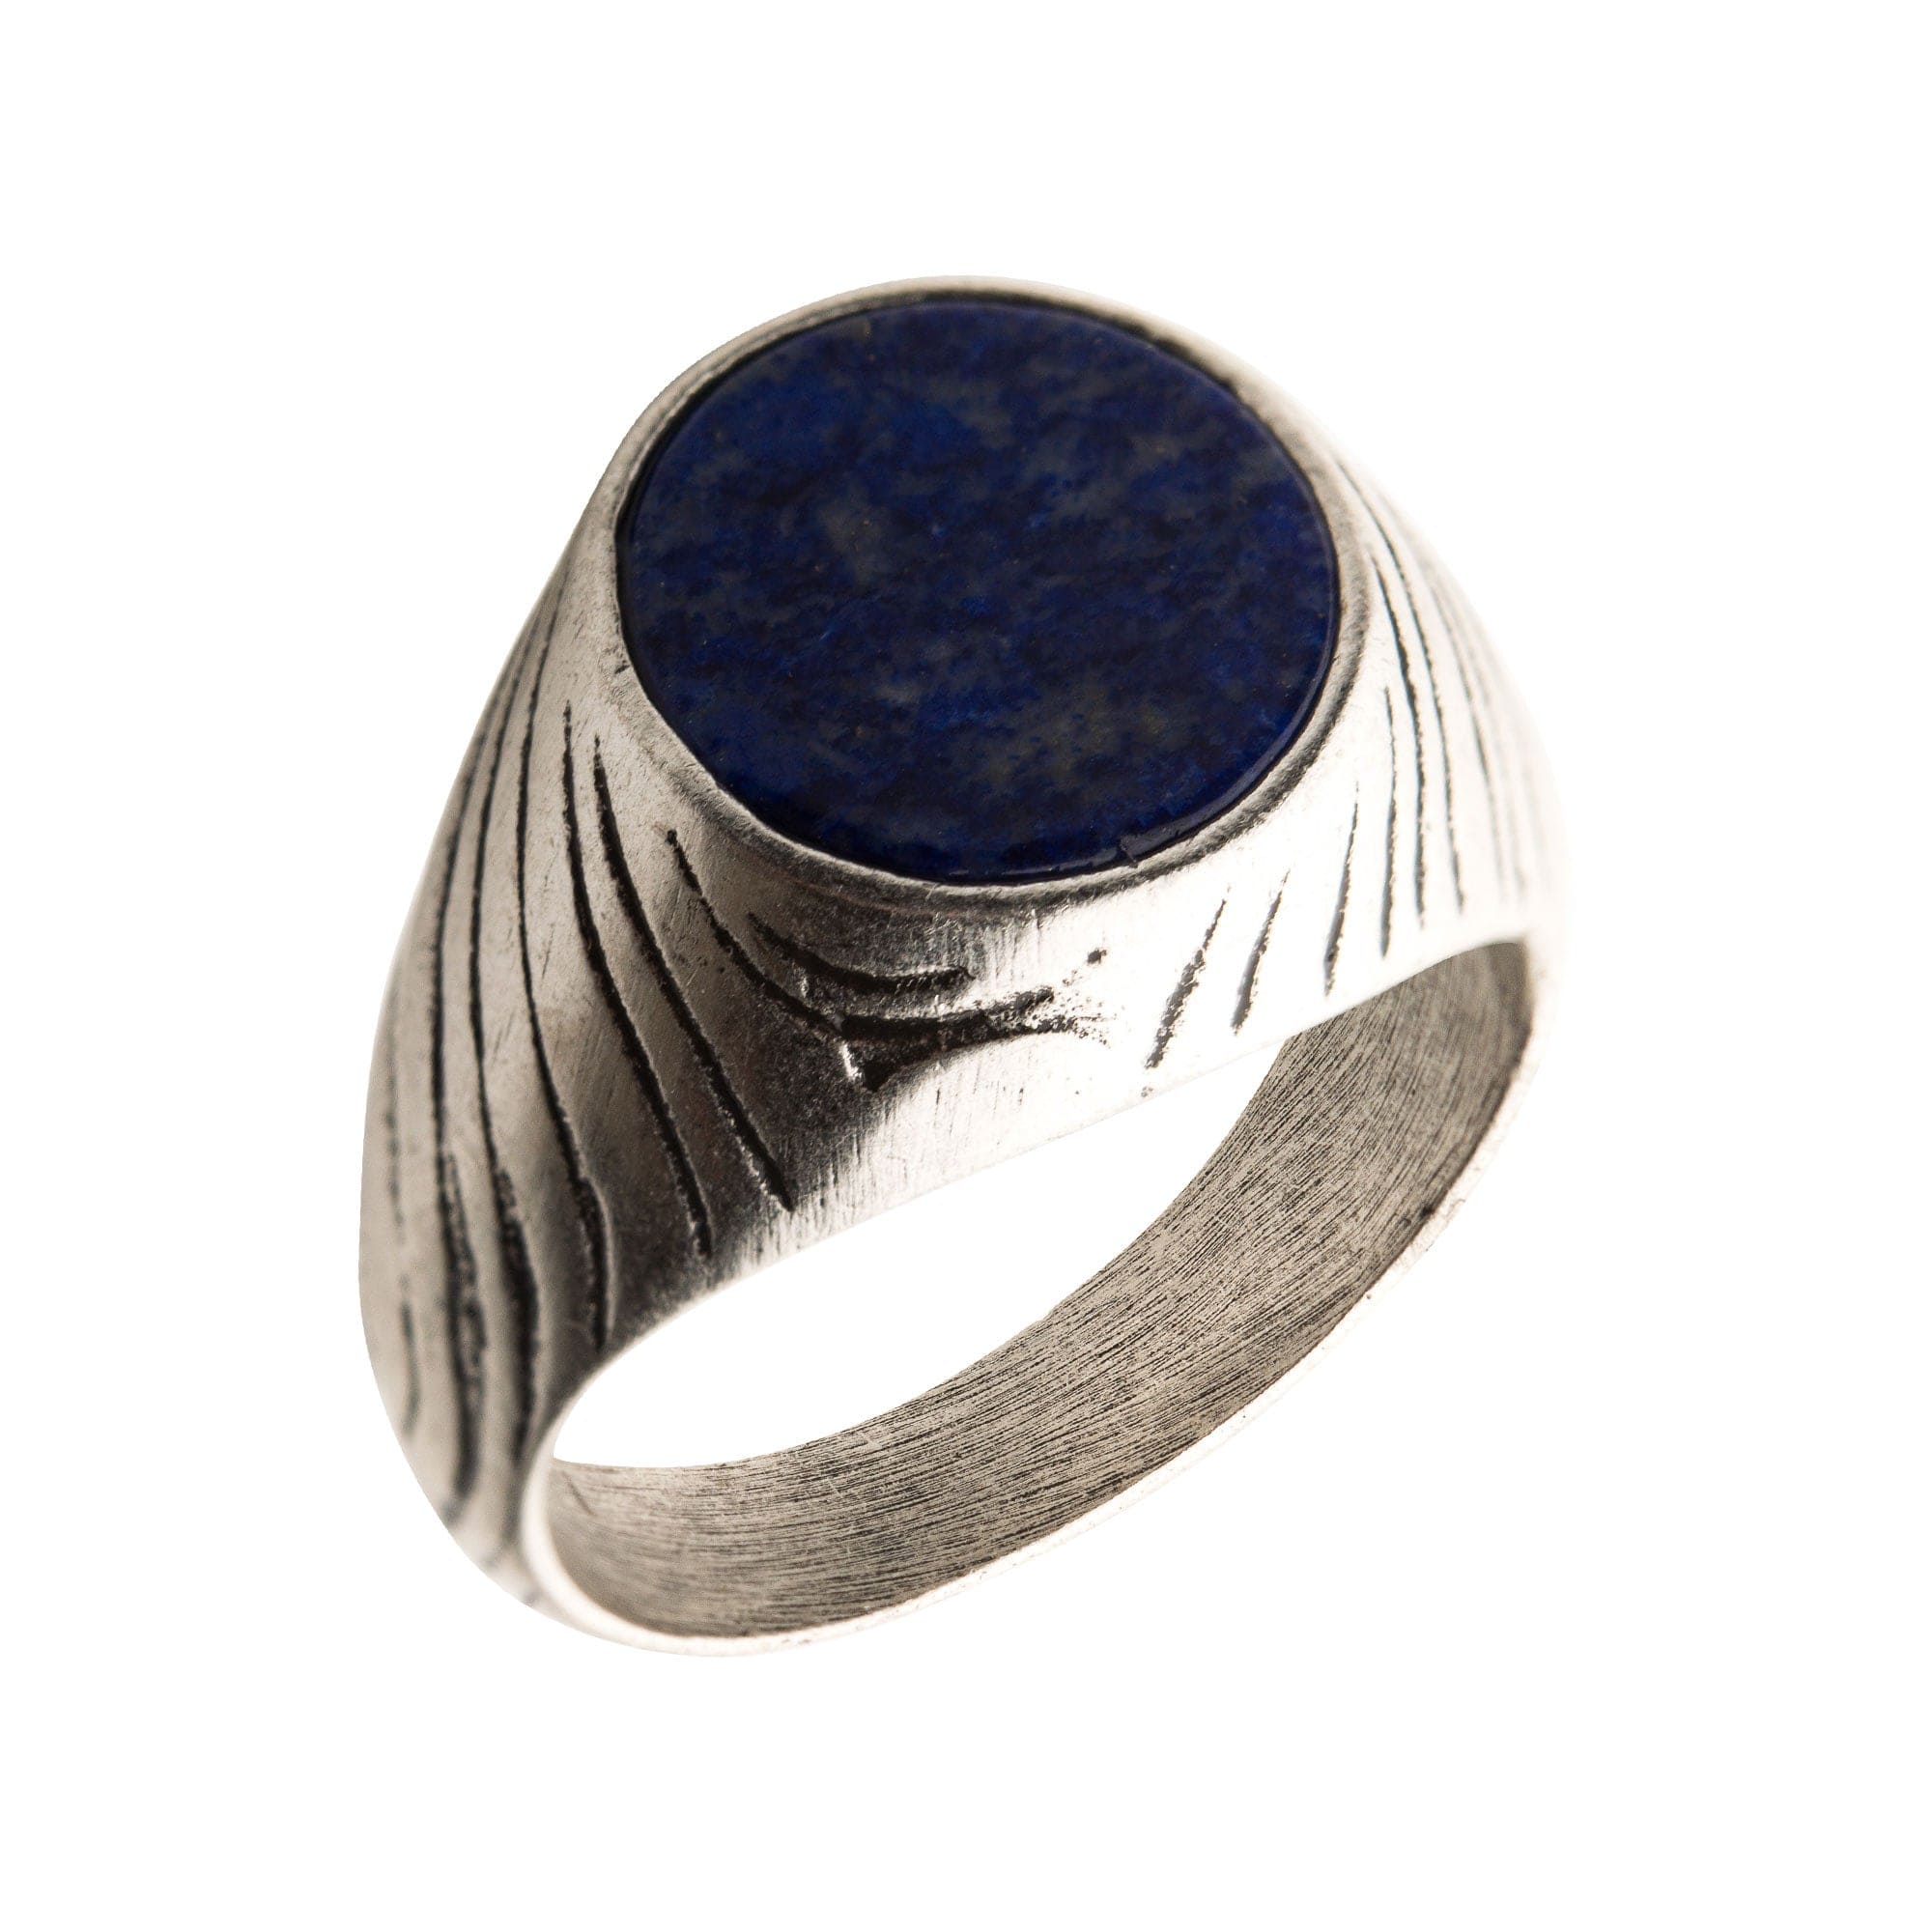 INOX JEWELRY Rings Antiqued Silver Tone Stainless Steel Matte Finish Lapis Lazuli Ring